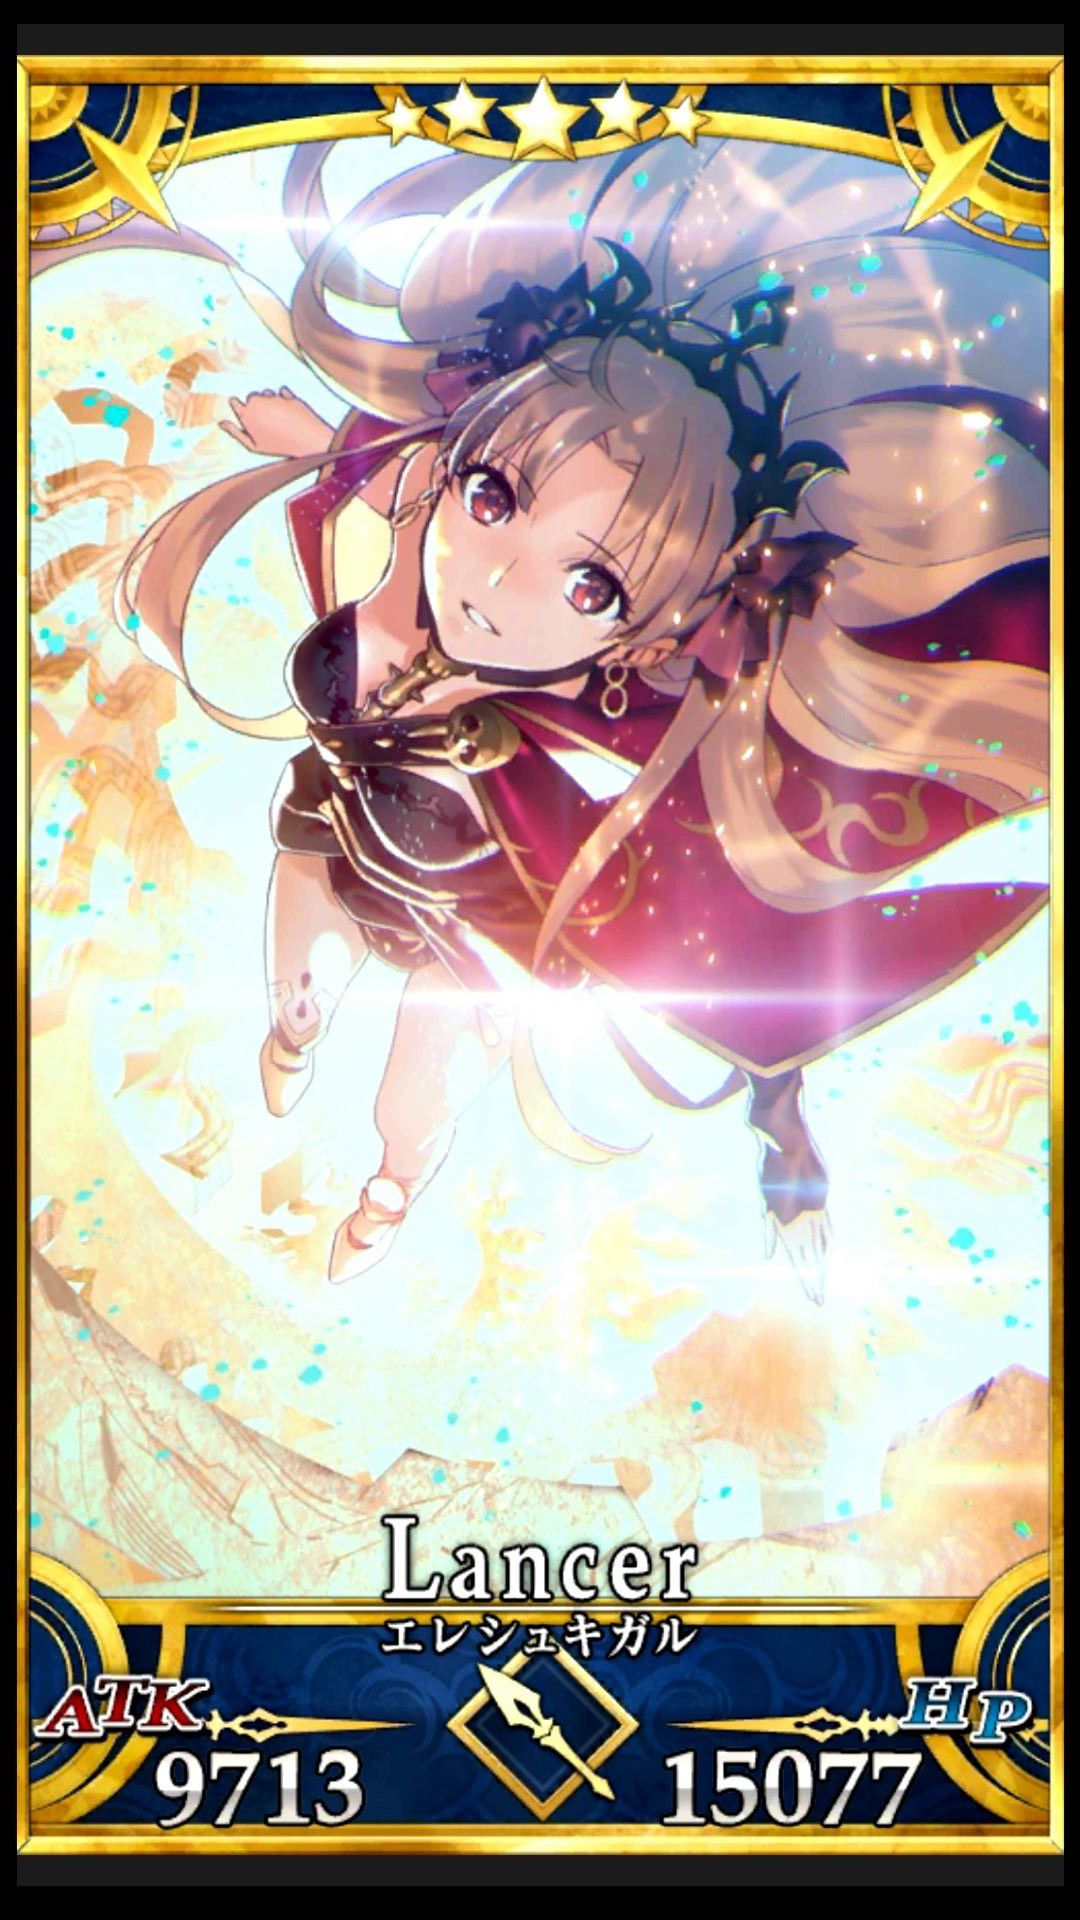 [Fate/Grand order] The final second coming illustrations cute Ereshkigal transcendence! 8